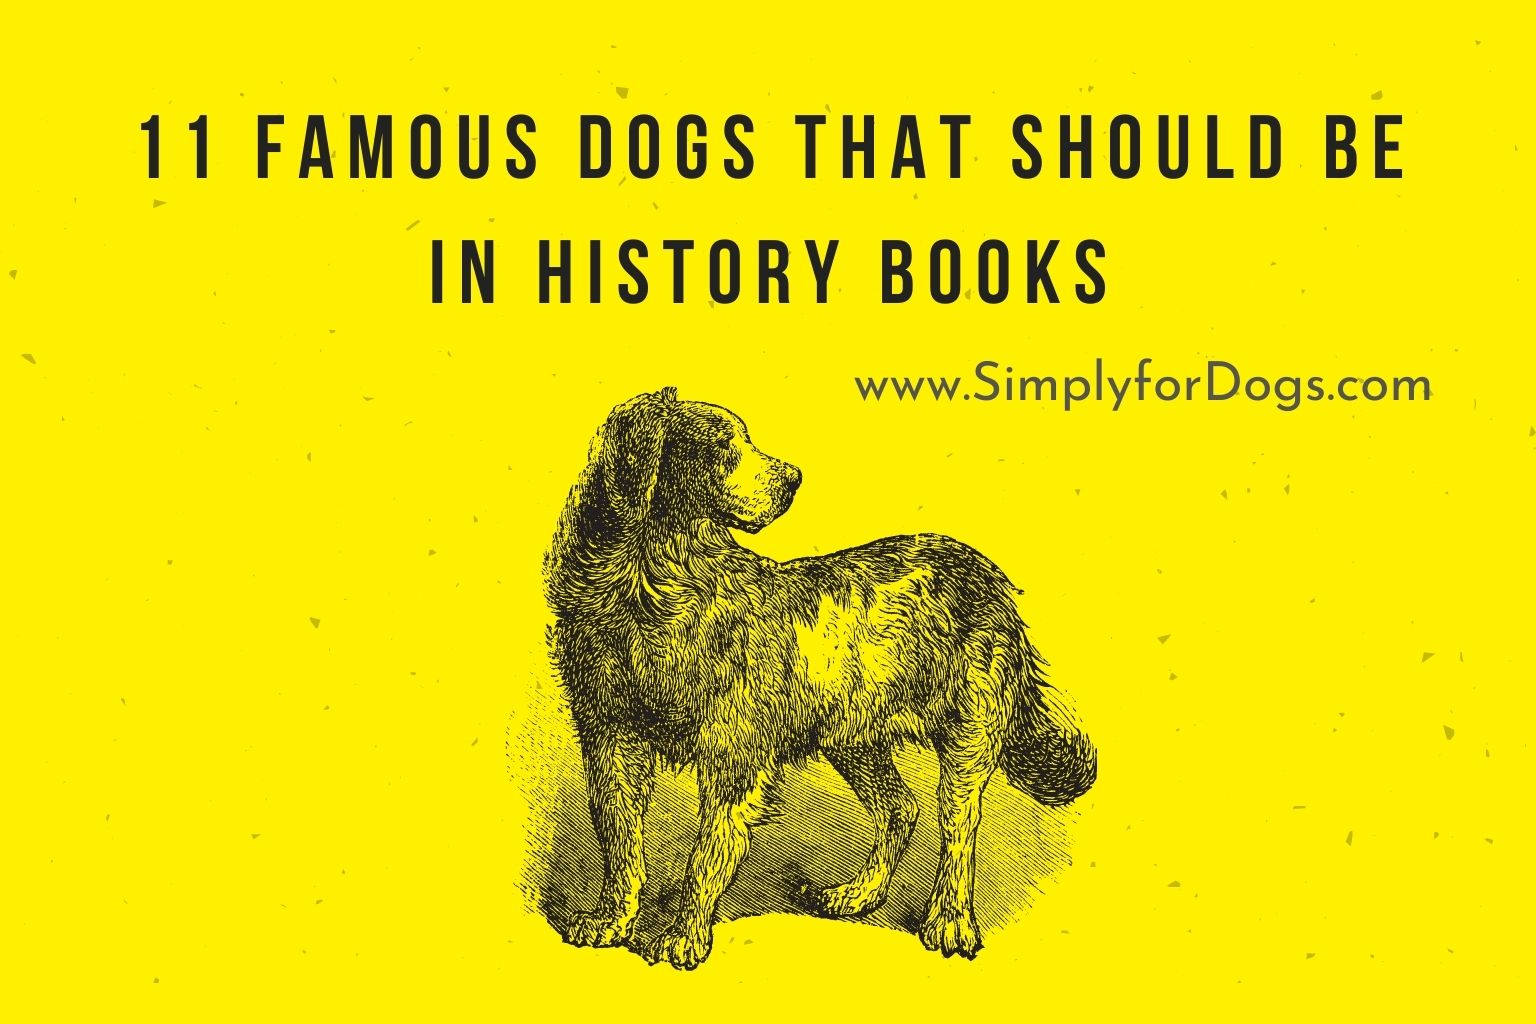 11 Famous Dogs That Should Be in History Books